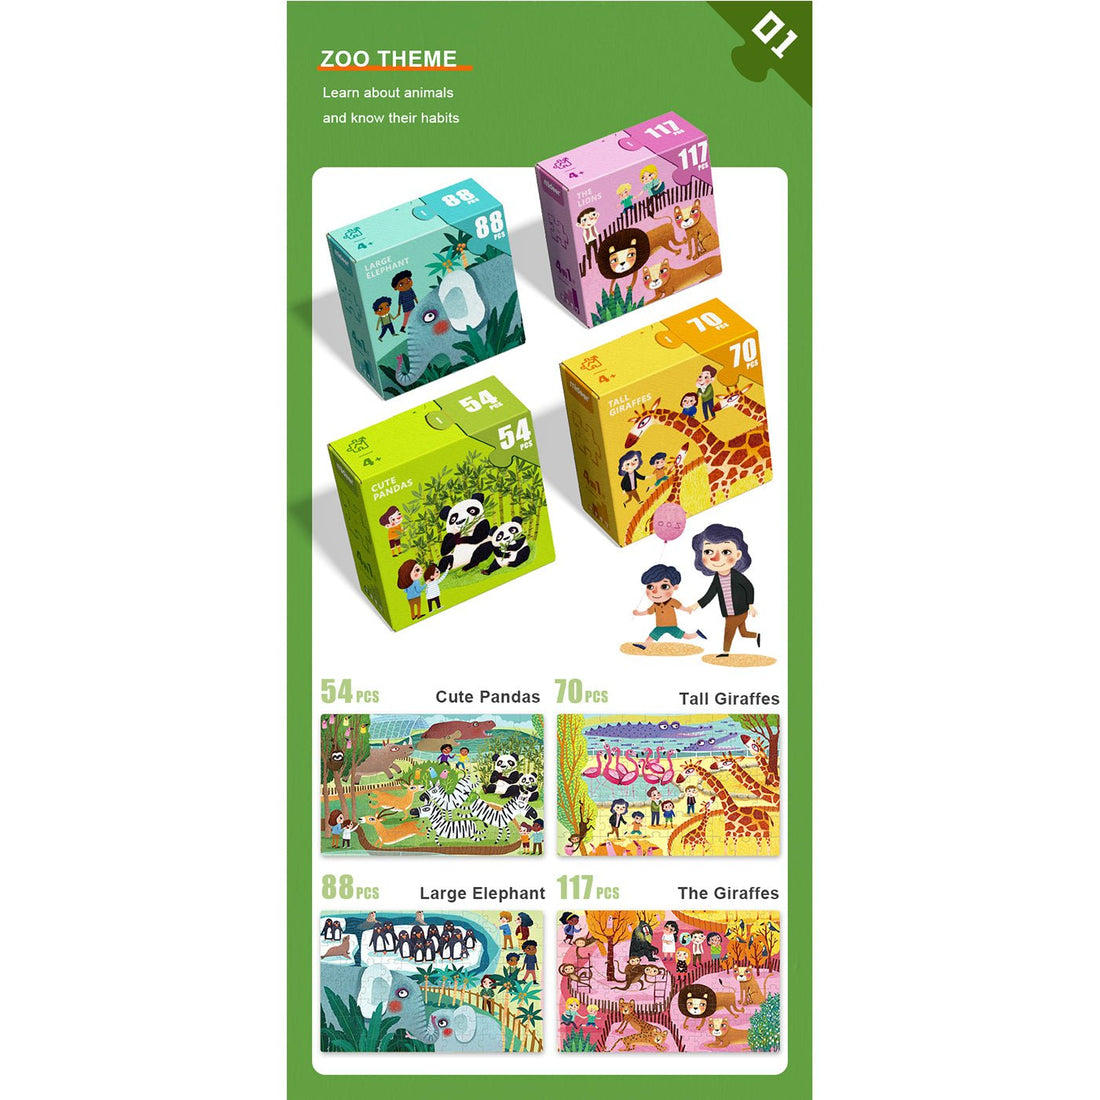 4 In 1 My Visit To The Zoo Puzzle Set 329pcs - 0cm